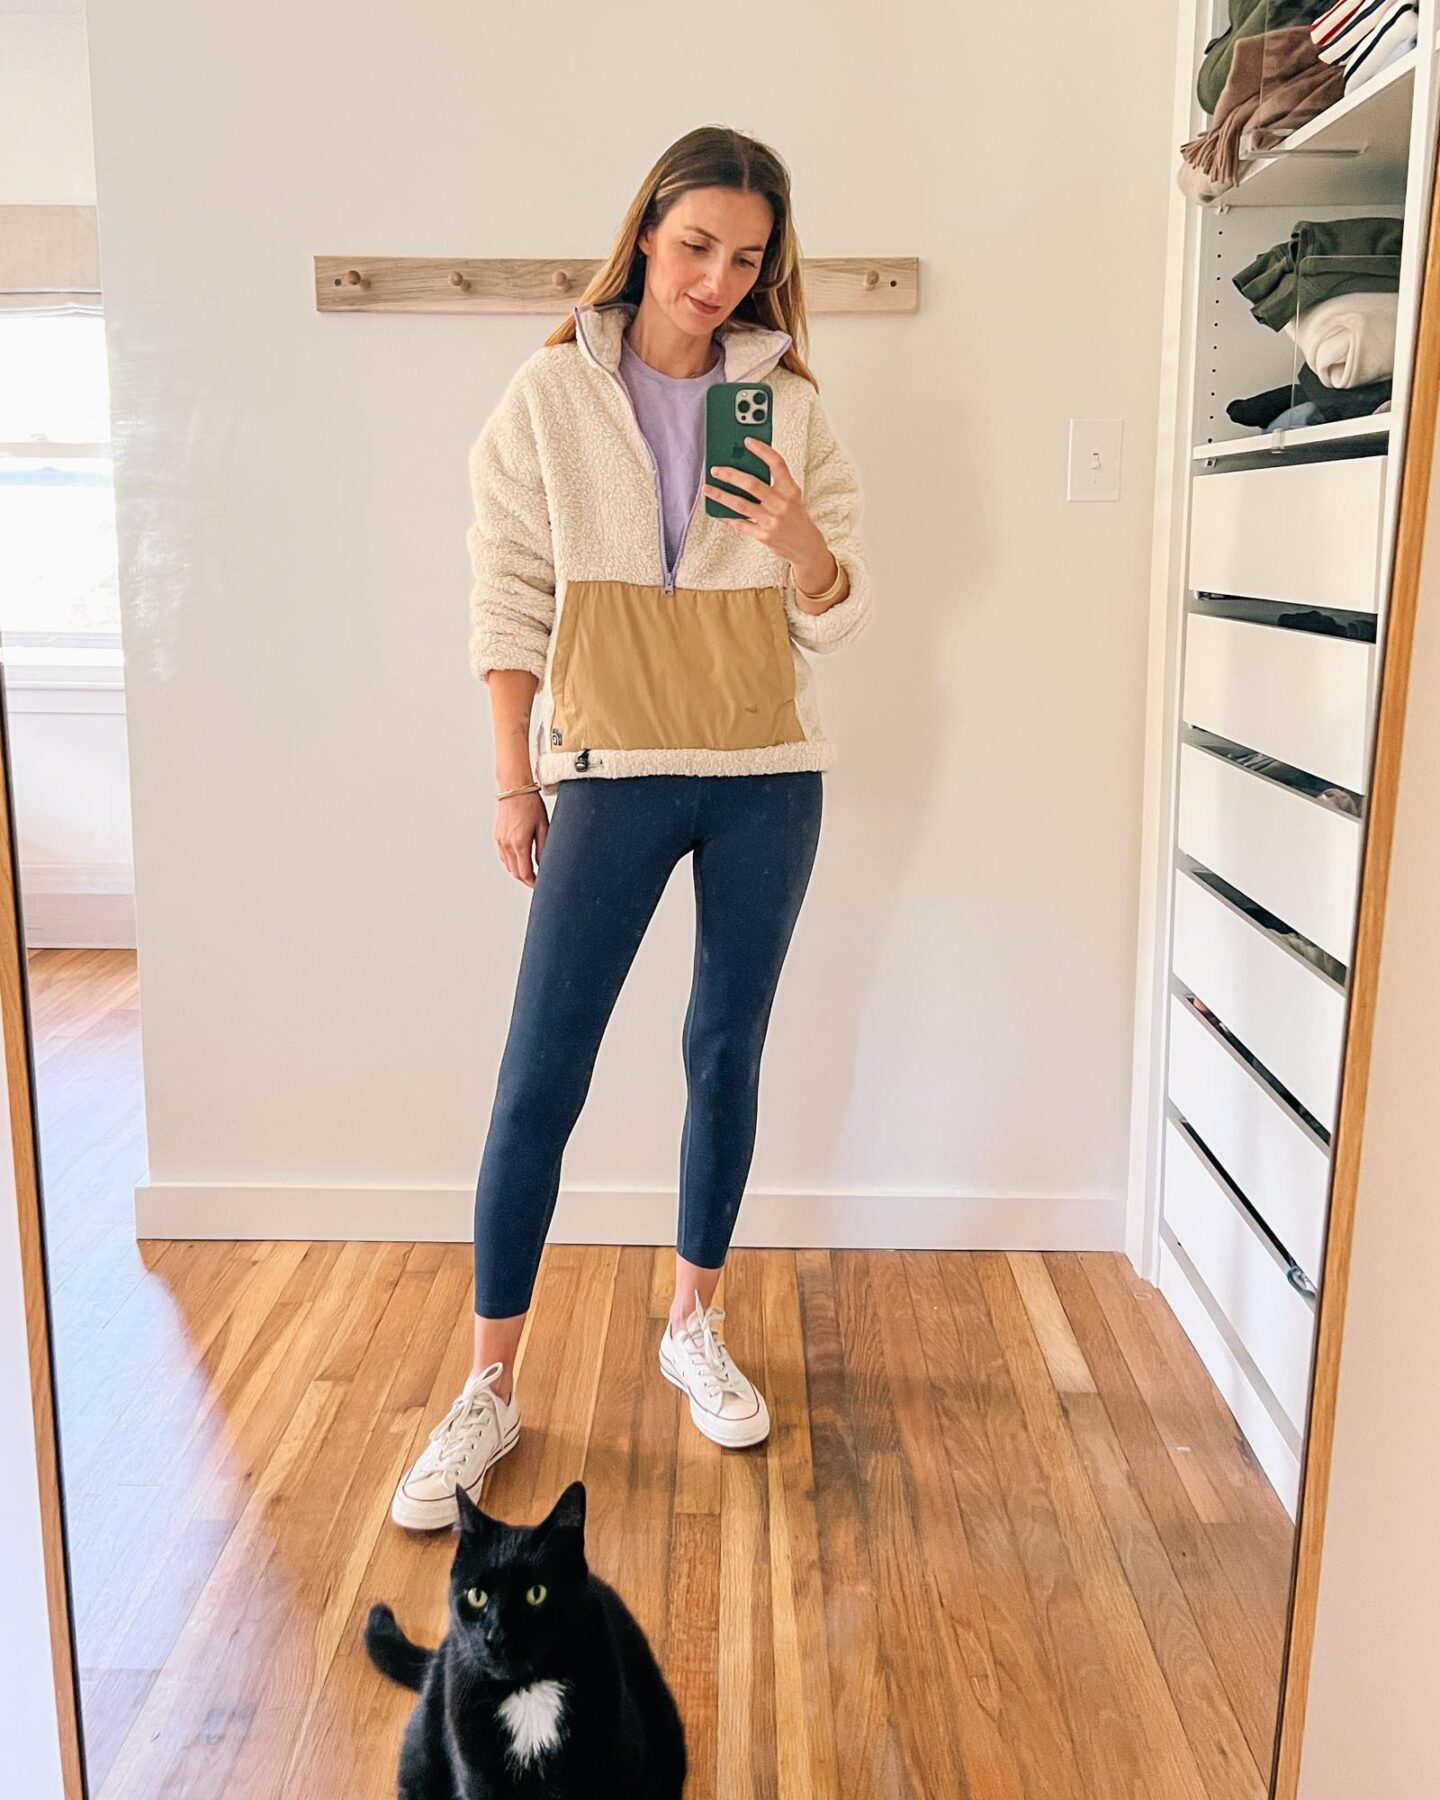 Fleece pullover outfit work from home